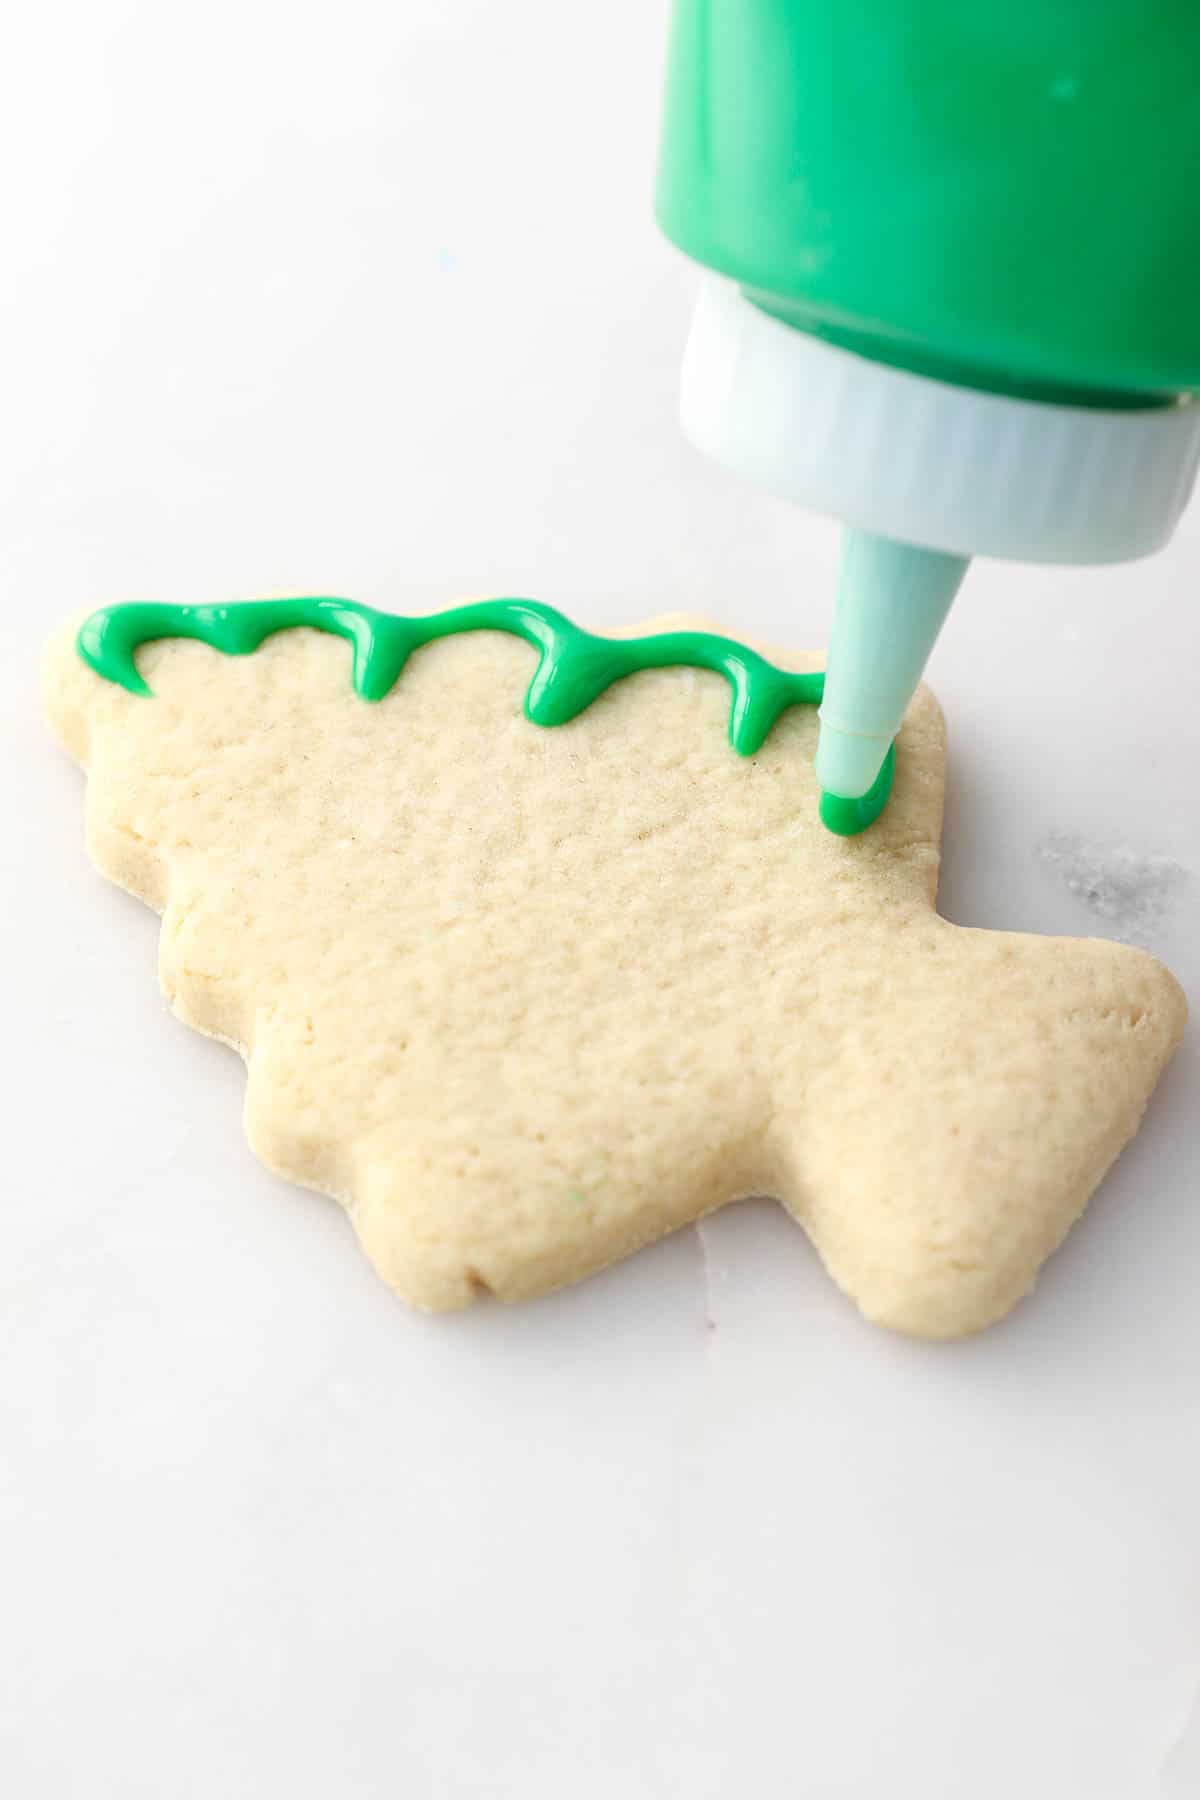 A squeeze bottle pipes green icing around the edge of a cut-out sugar cookie shaped like a Christmas tree.